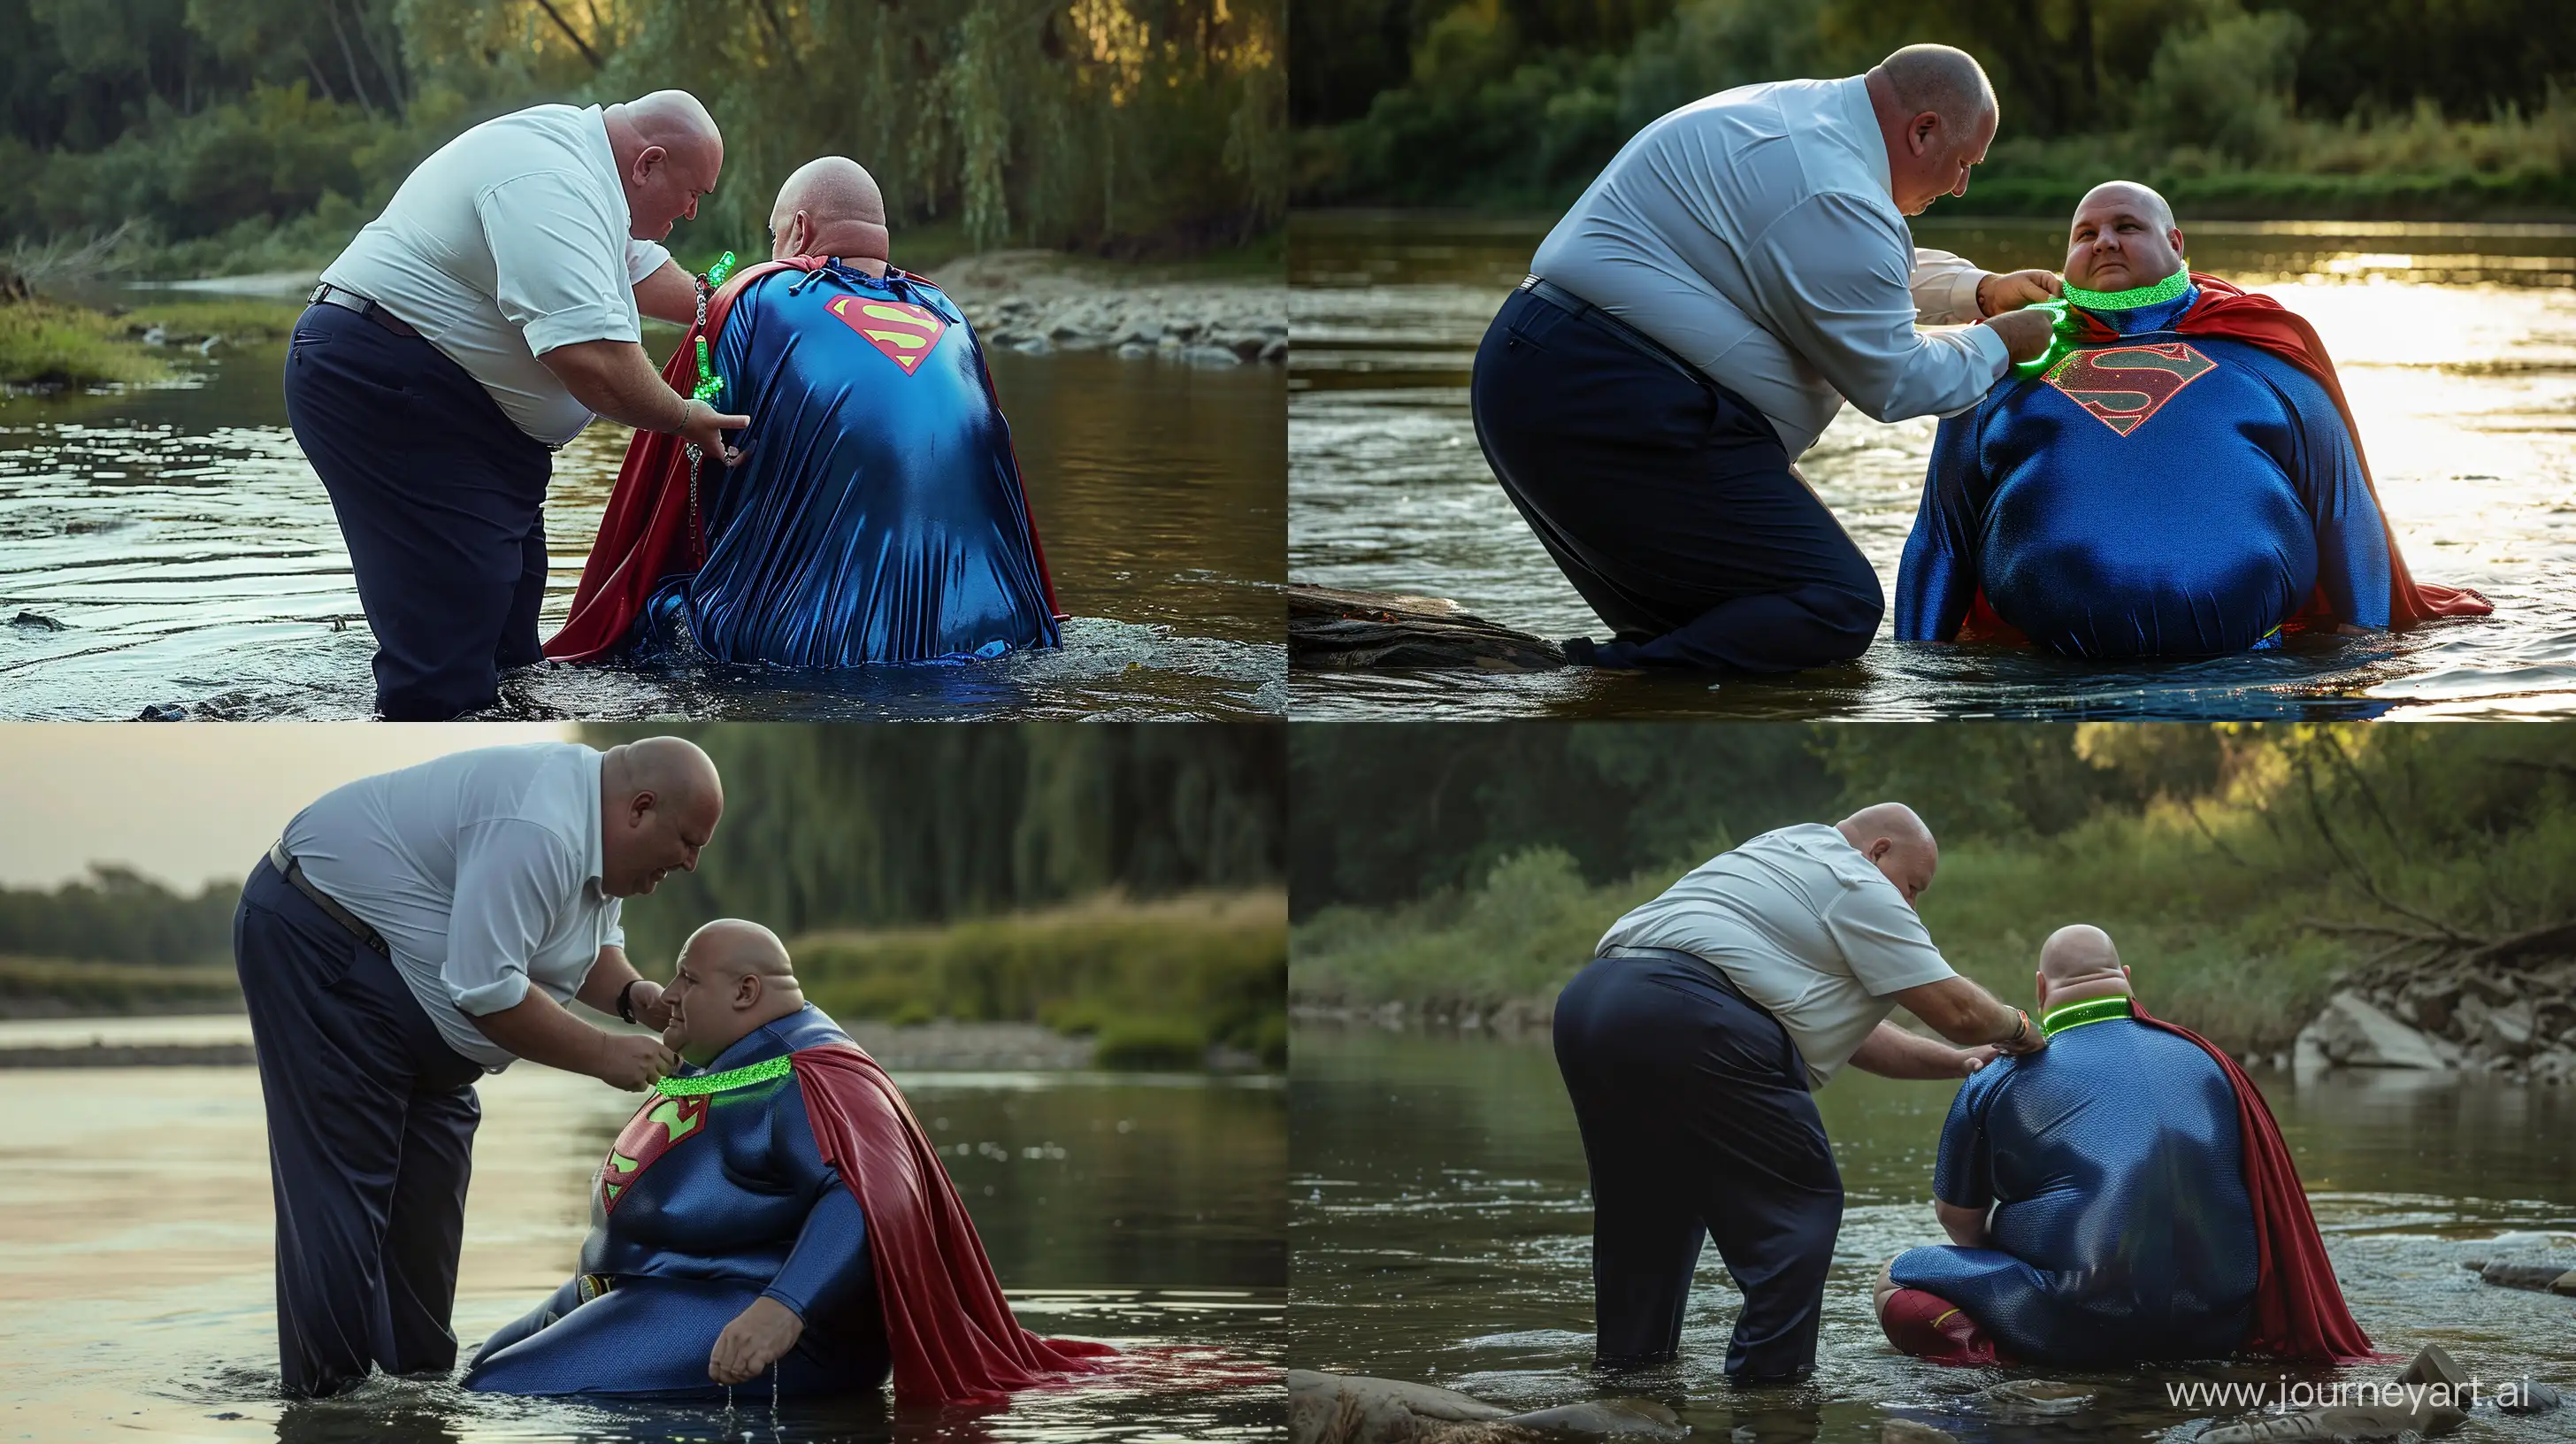 Elderly-Superman-Collar-Adjustment-by-the-River